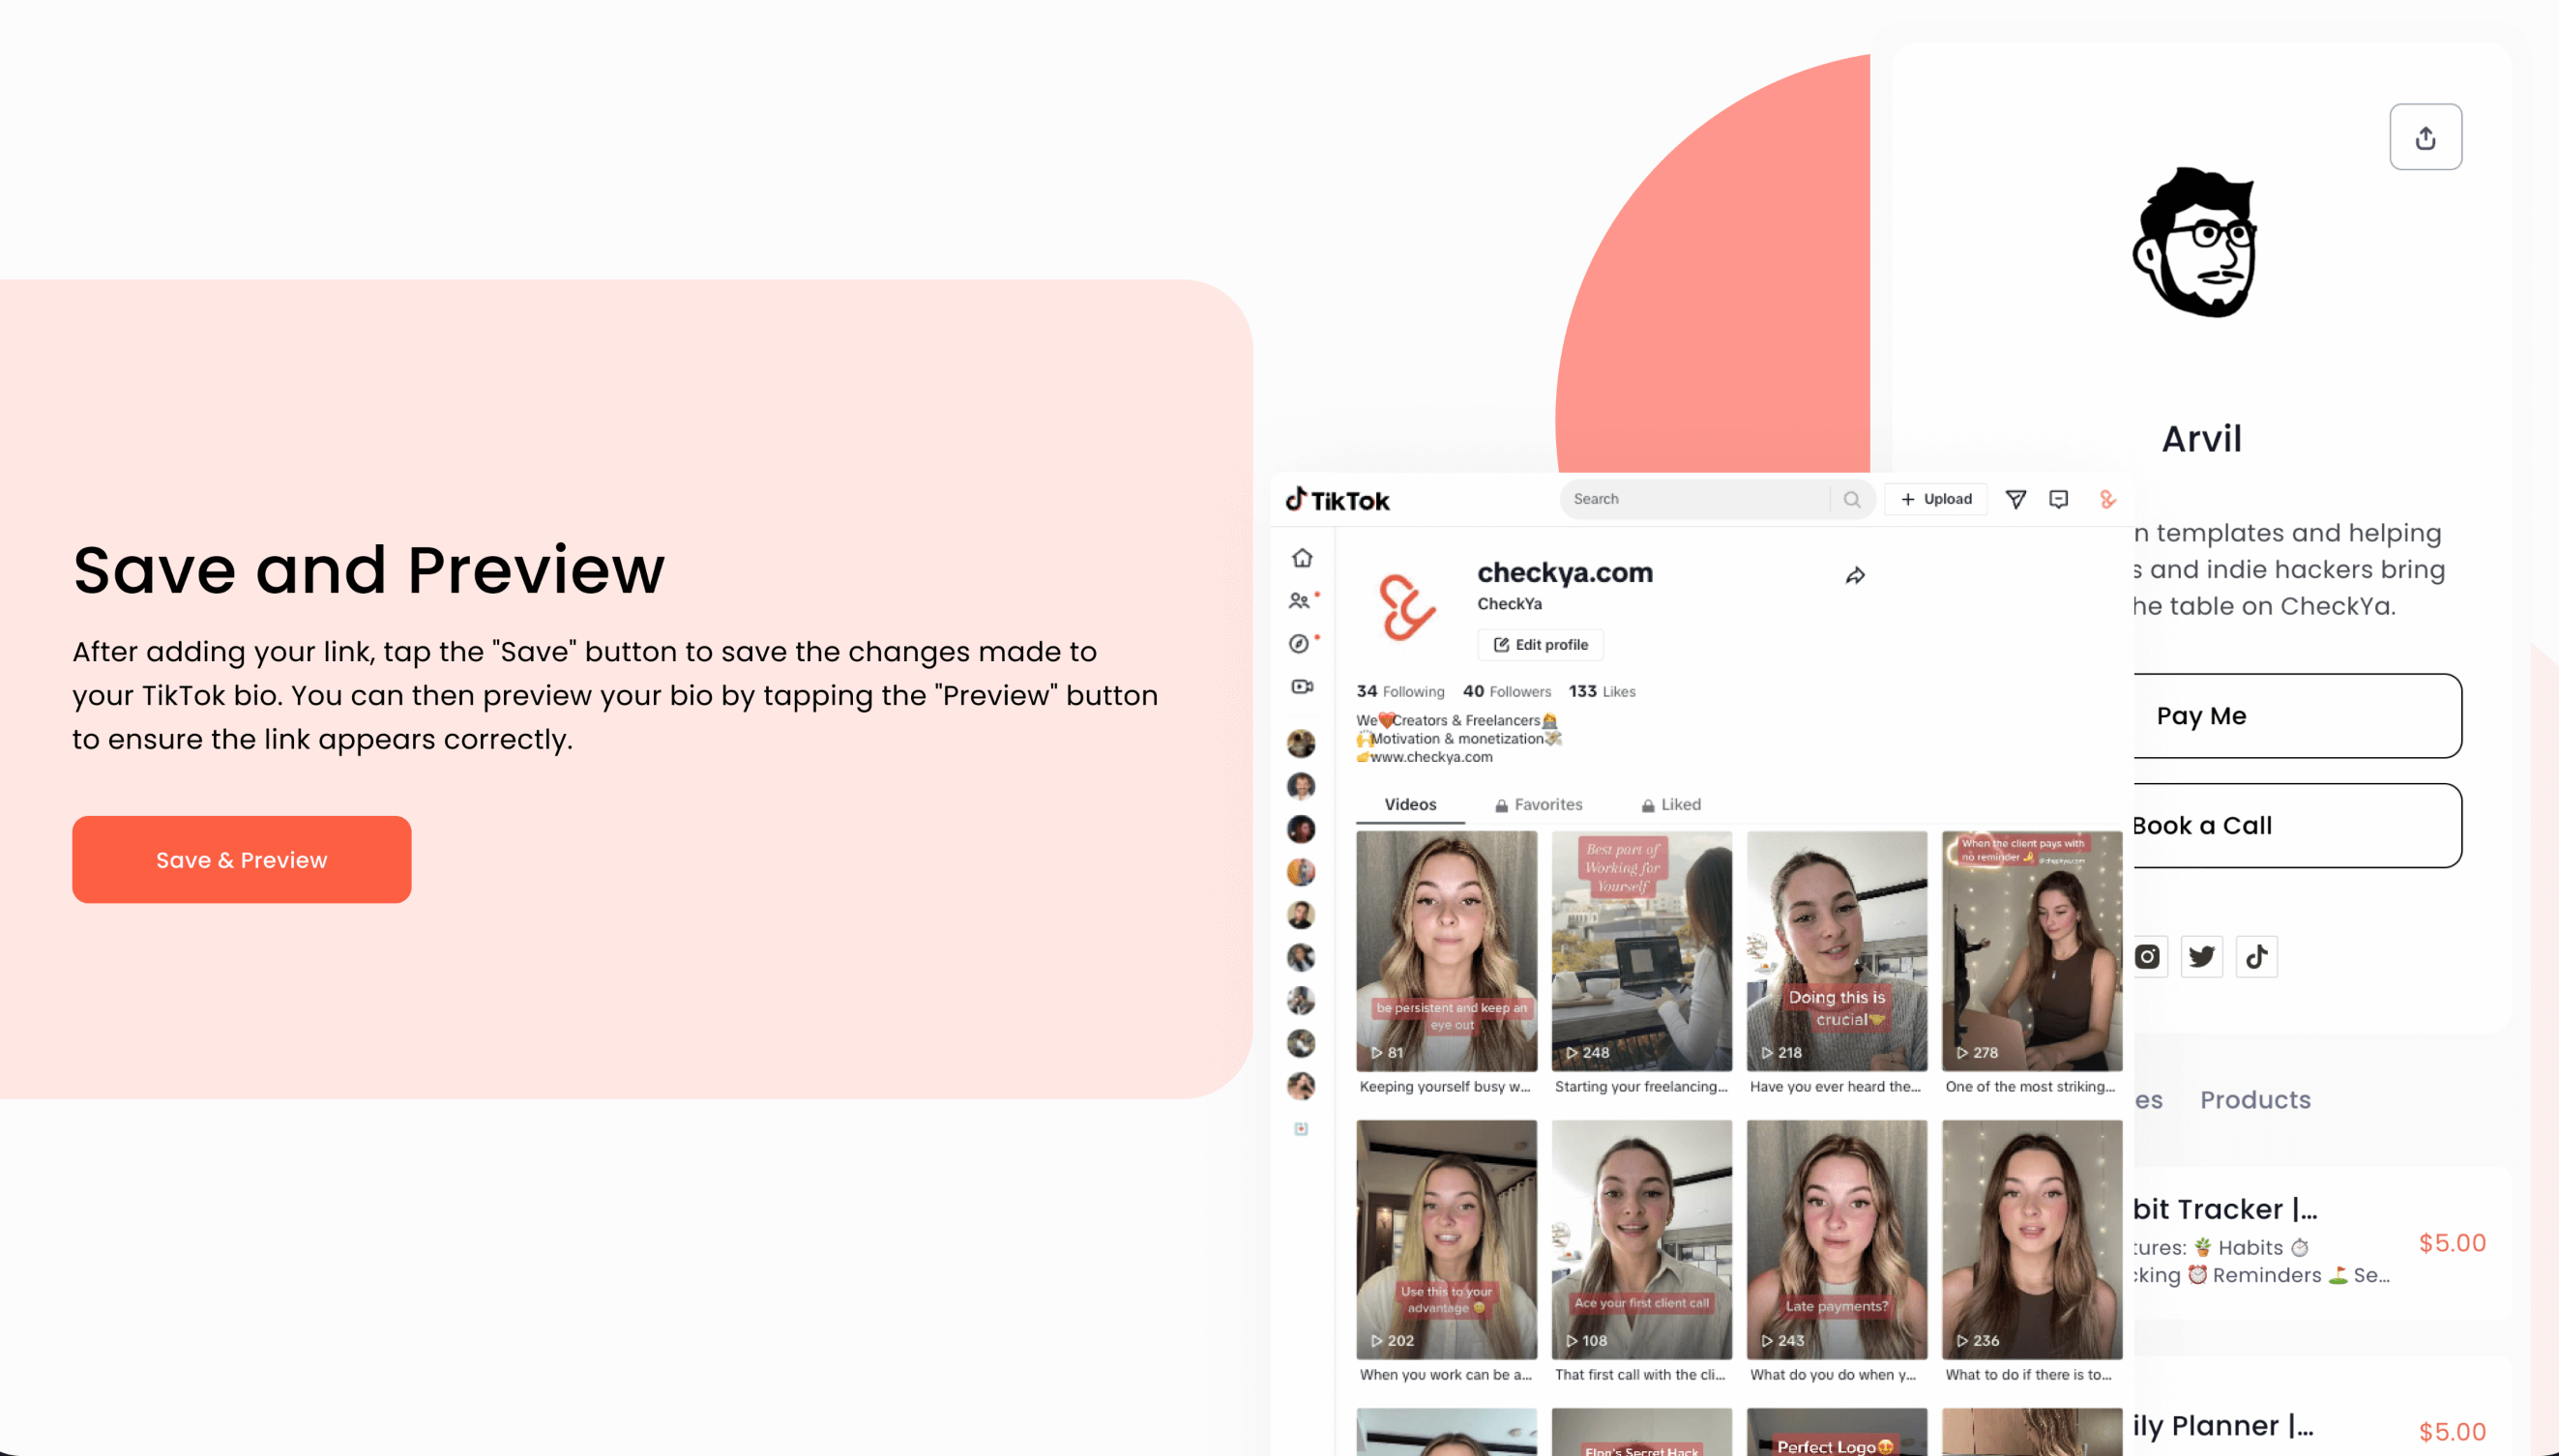 Save and Preview your TikTok link. 